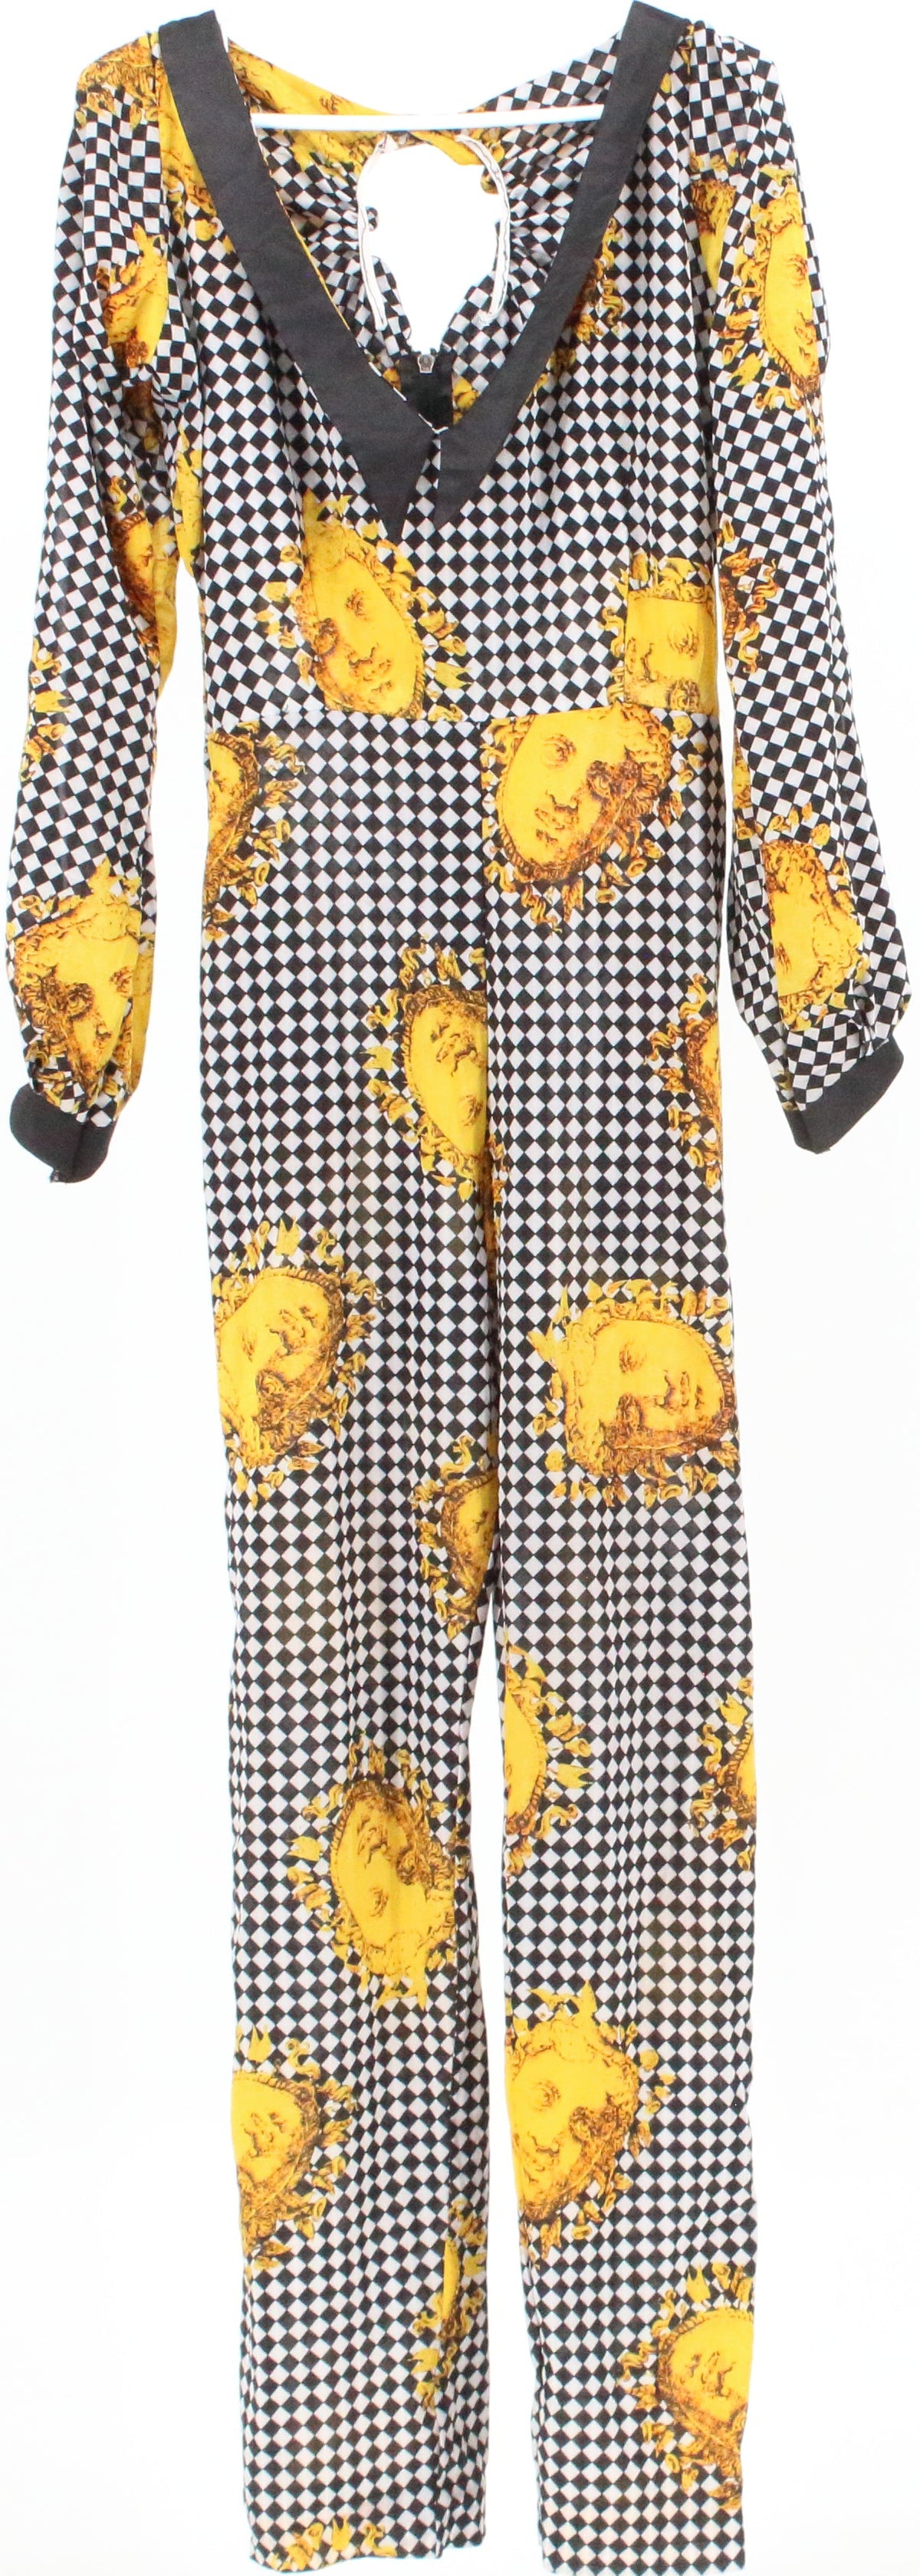 Black White and Yellow Print Open Sleeves Jumpsuit